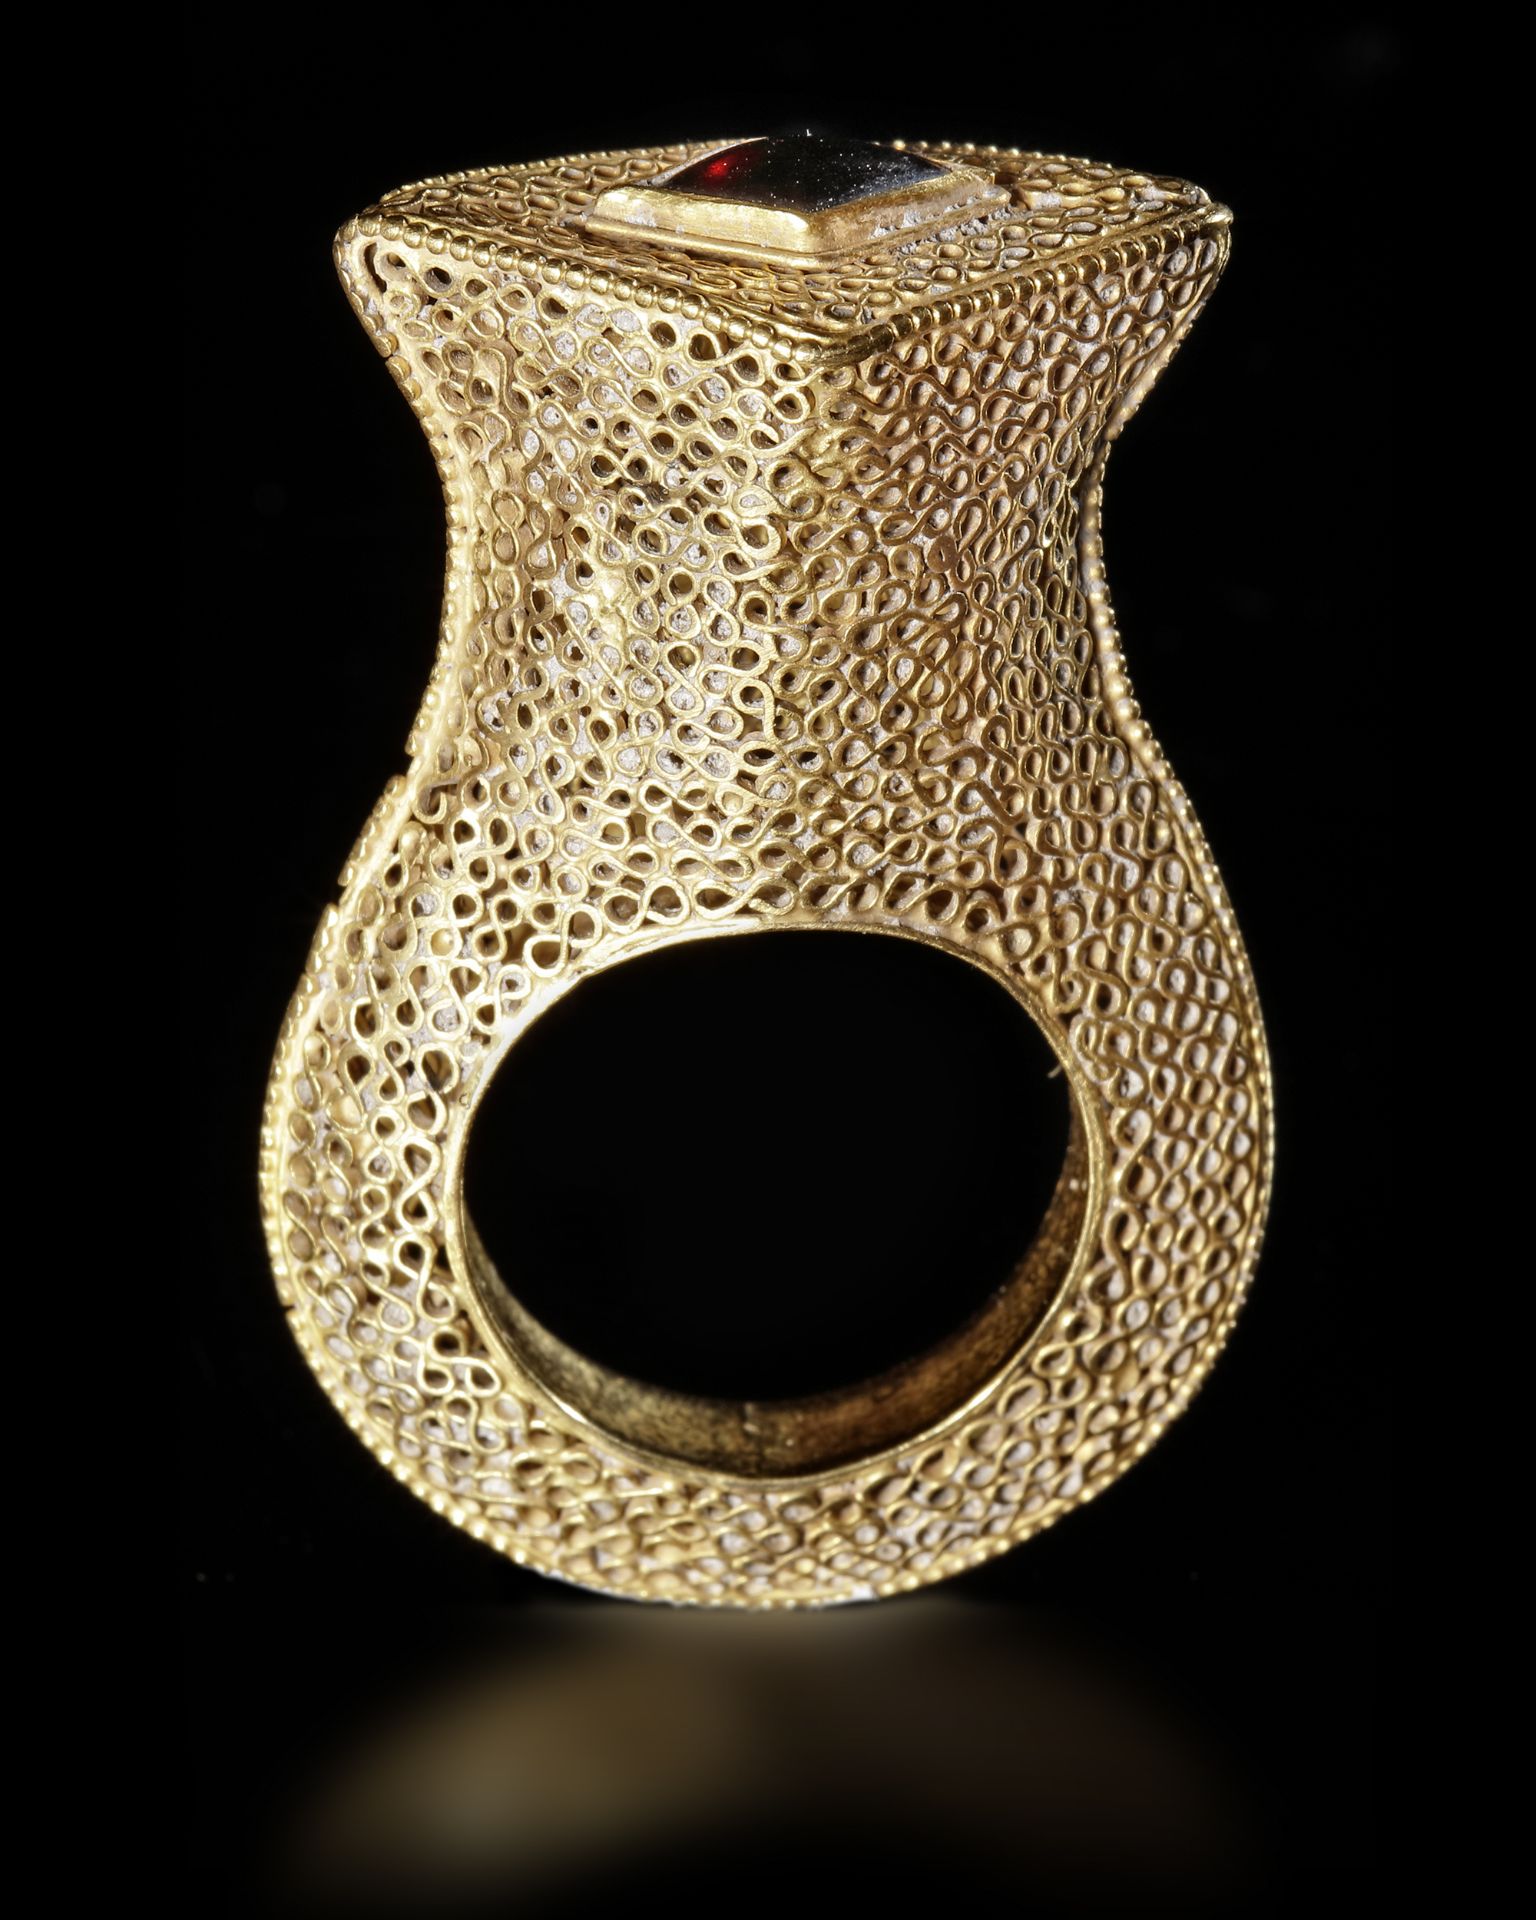 A MAGNIFICENT EARLY ISLAMIC GOLD RING, NEAR EAST 10TH-11TH CENTURY - Bild 4 aus 5